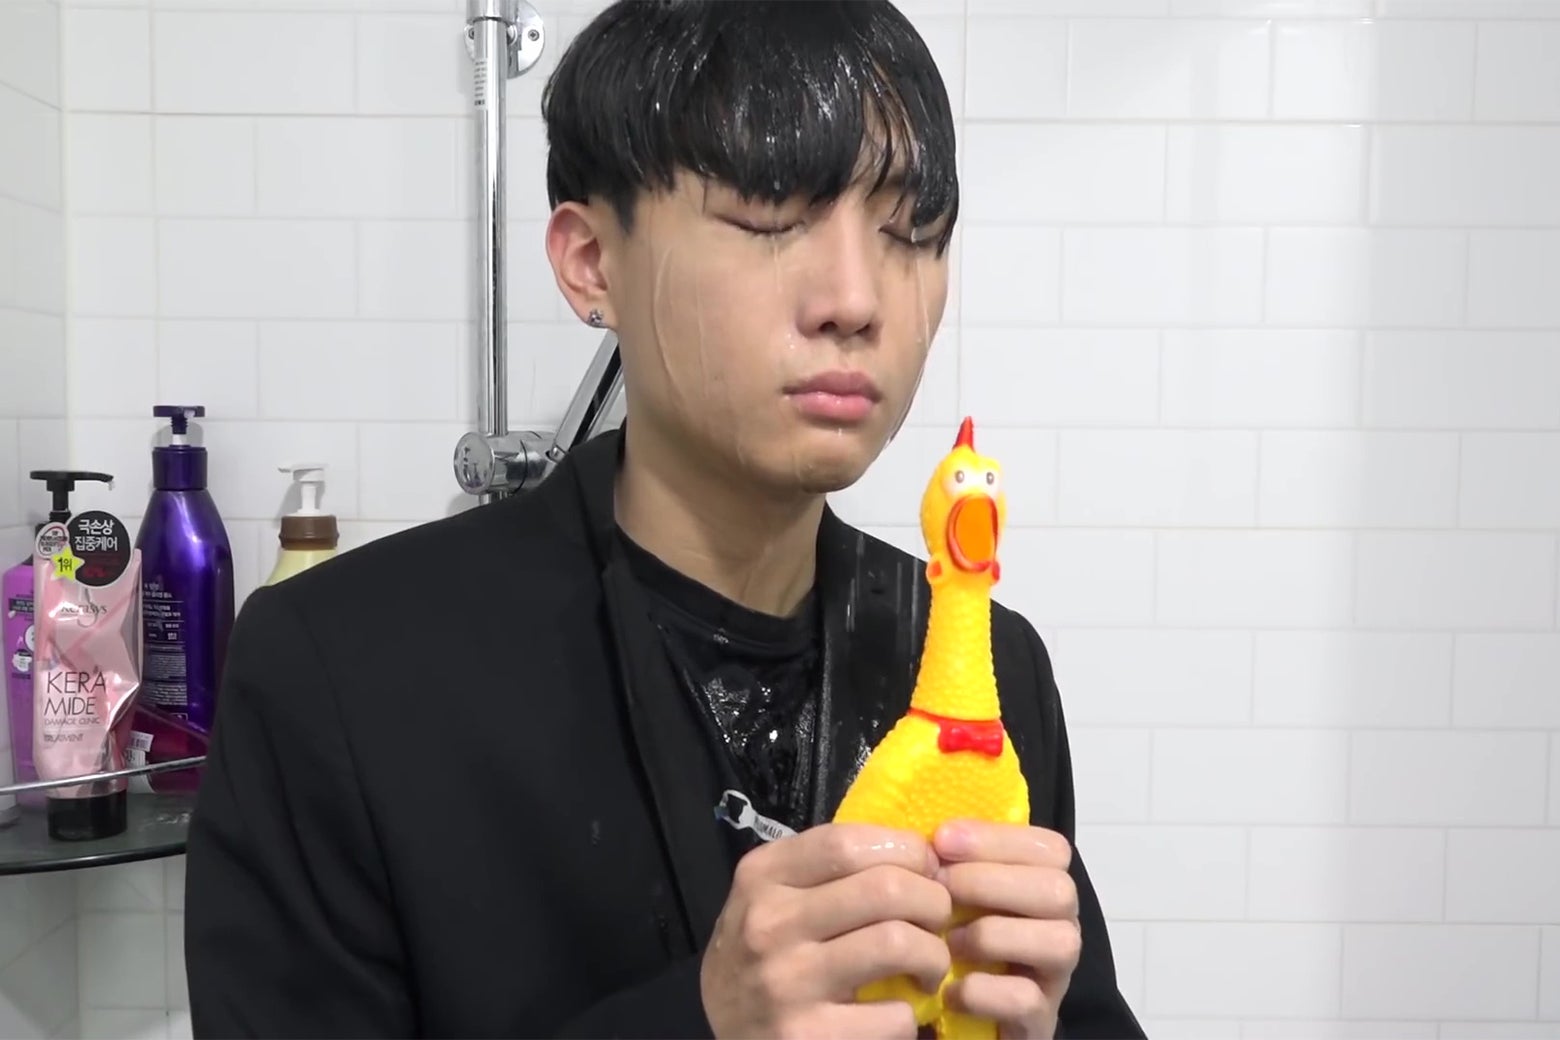 Big Marvel playing the rubber chicken in the shower.